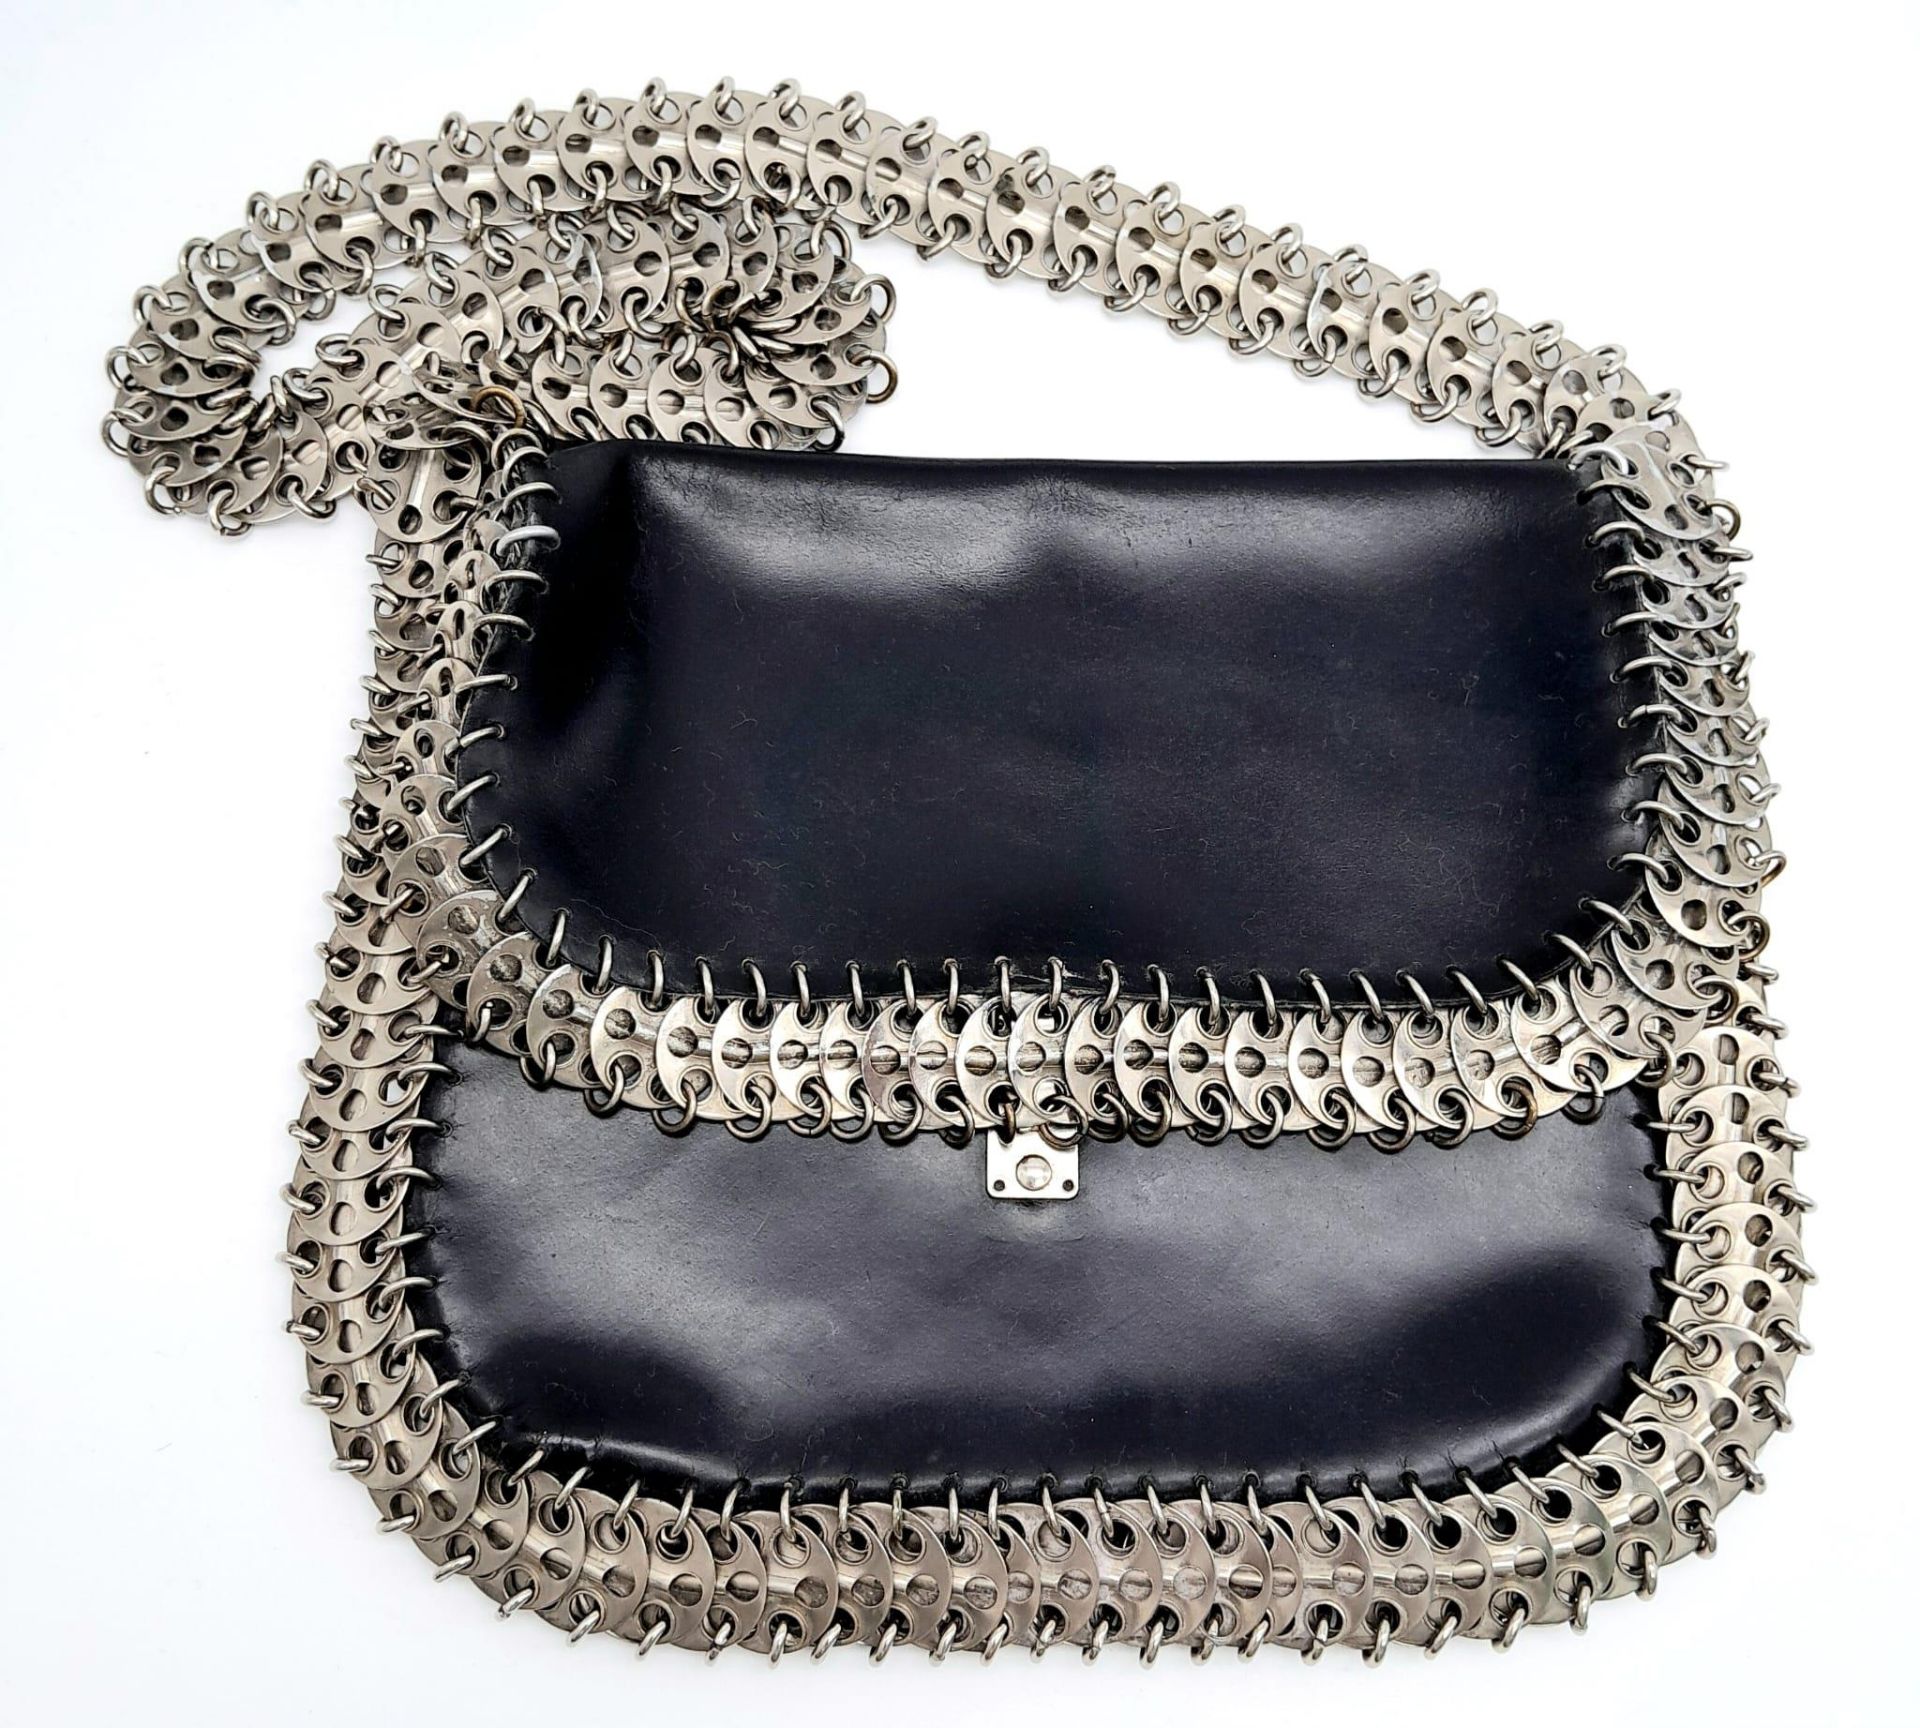 A Paco Rabanne Black 69 Chain Bag. Leather exterior with silver-toned perforated steel discs